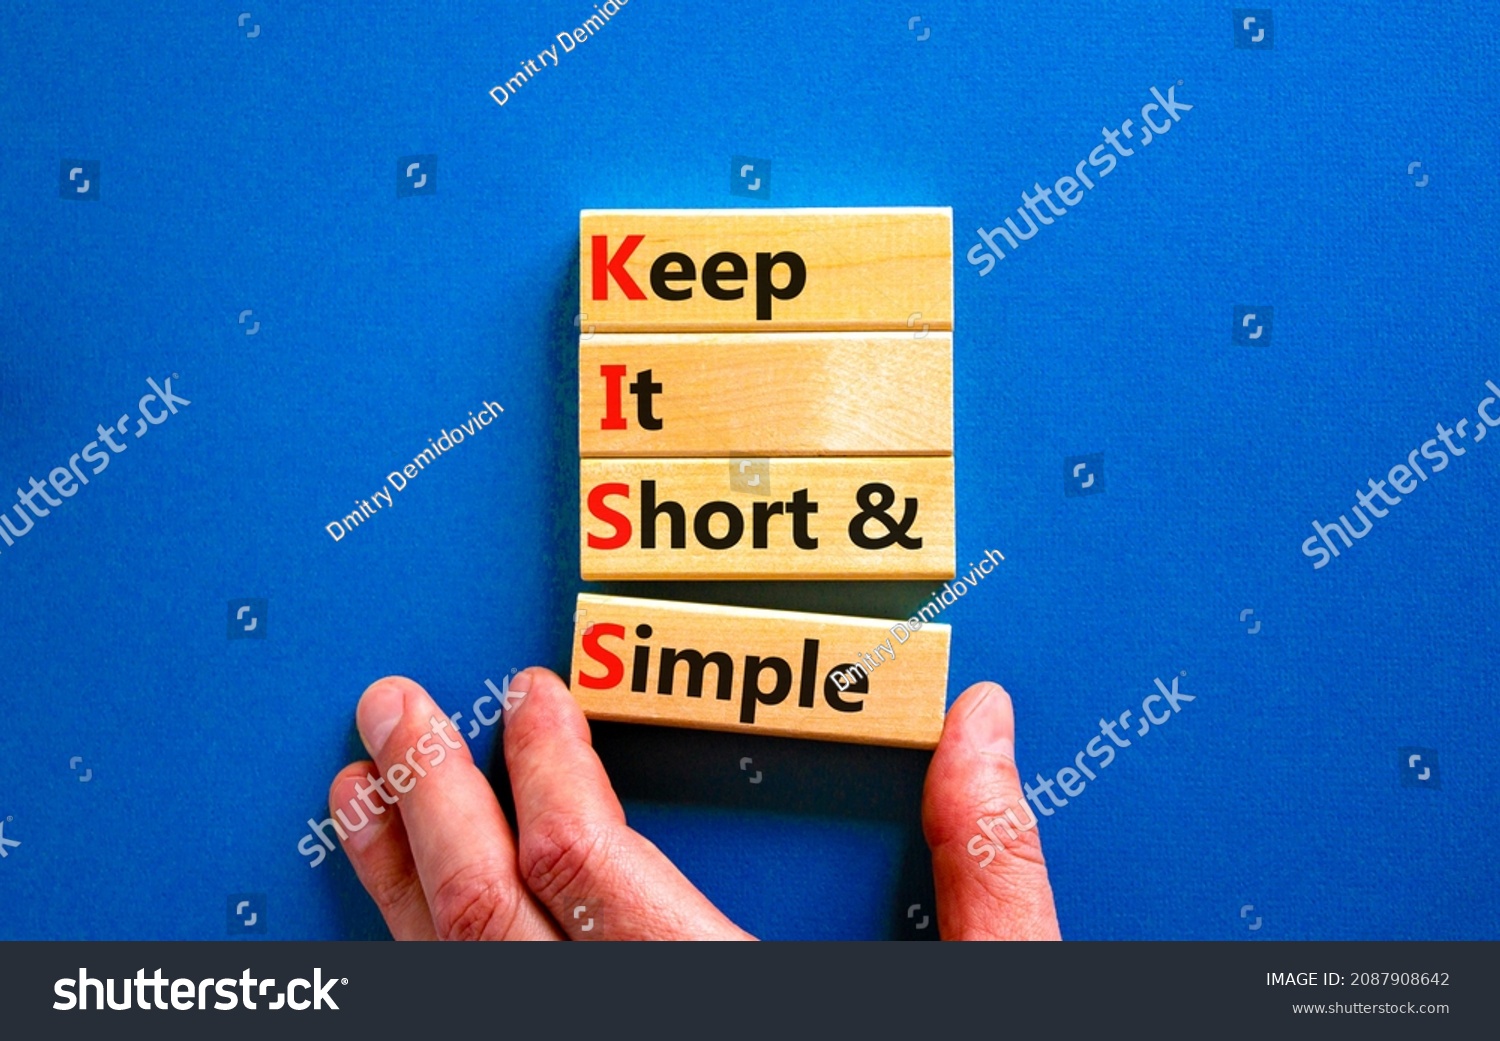 KISS keep it short and simple symbol. Concept words KISS keep it short and simple wooden blocks. Beautiful blue table, blue background. Business KISS keep it short and simple concept. Copy space. #2087908642